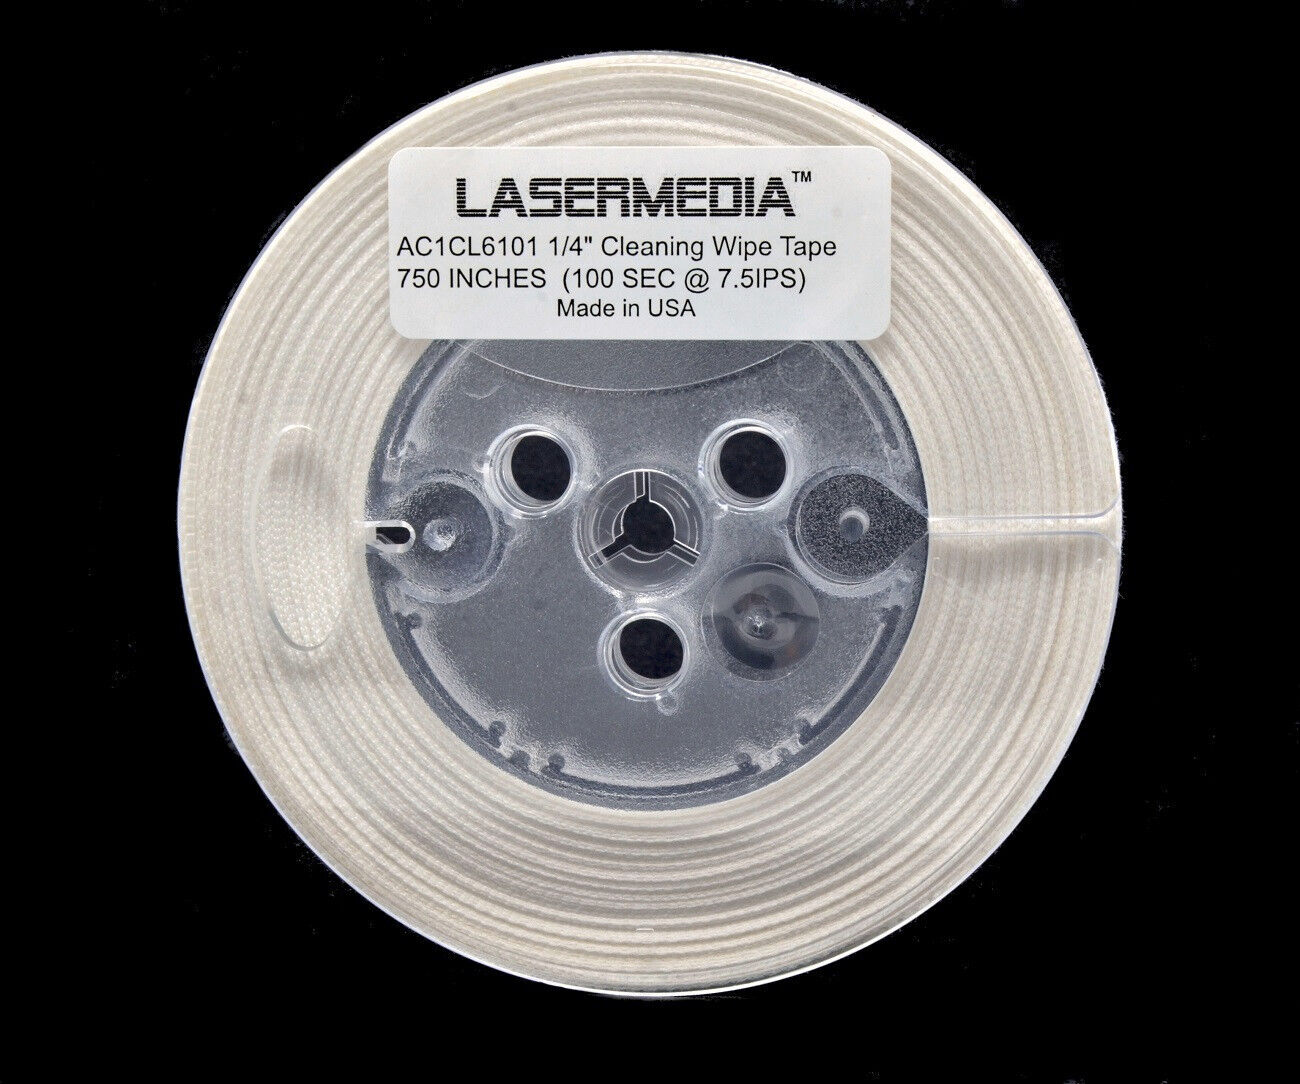 Open Reel Cleaning Tape 1/4" X 750" 100 Seconds at 7.5 IPS NEW! by Lasermedia